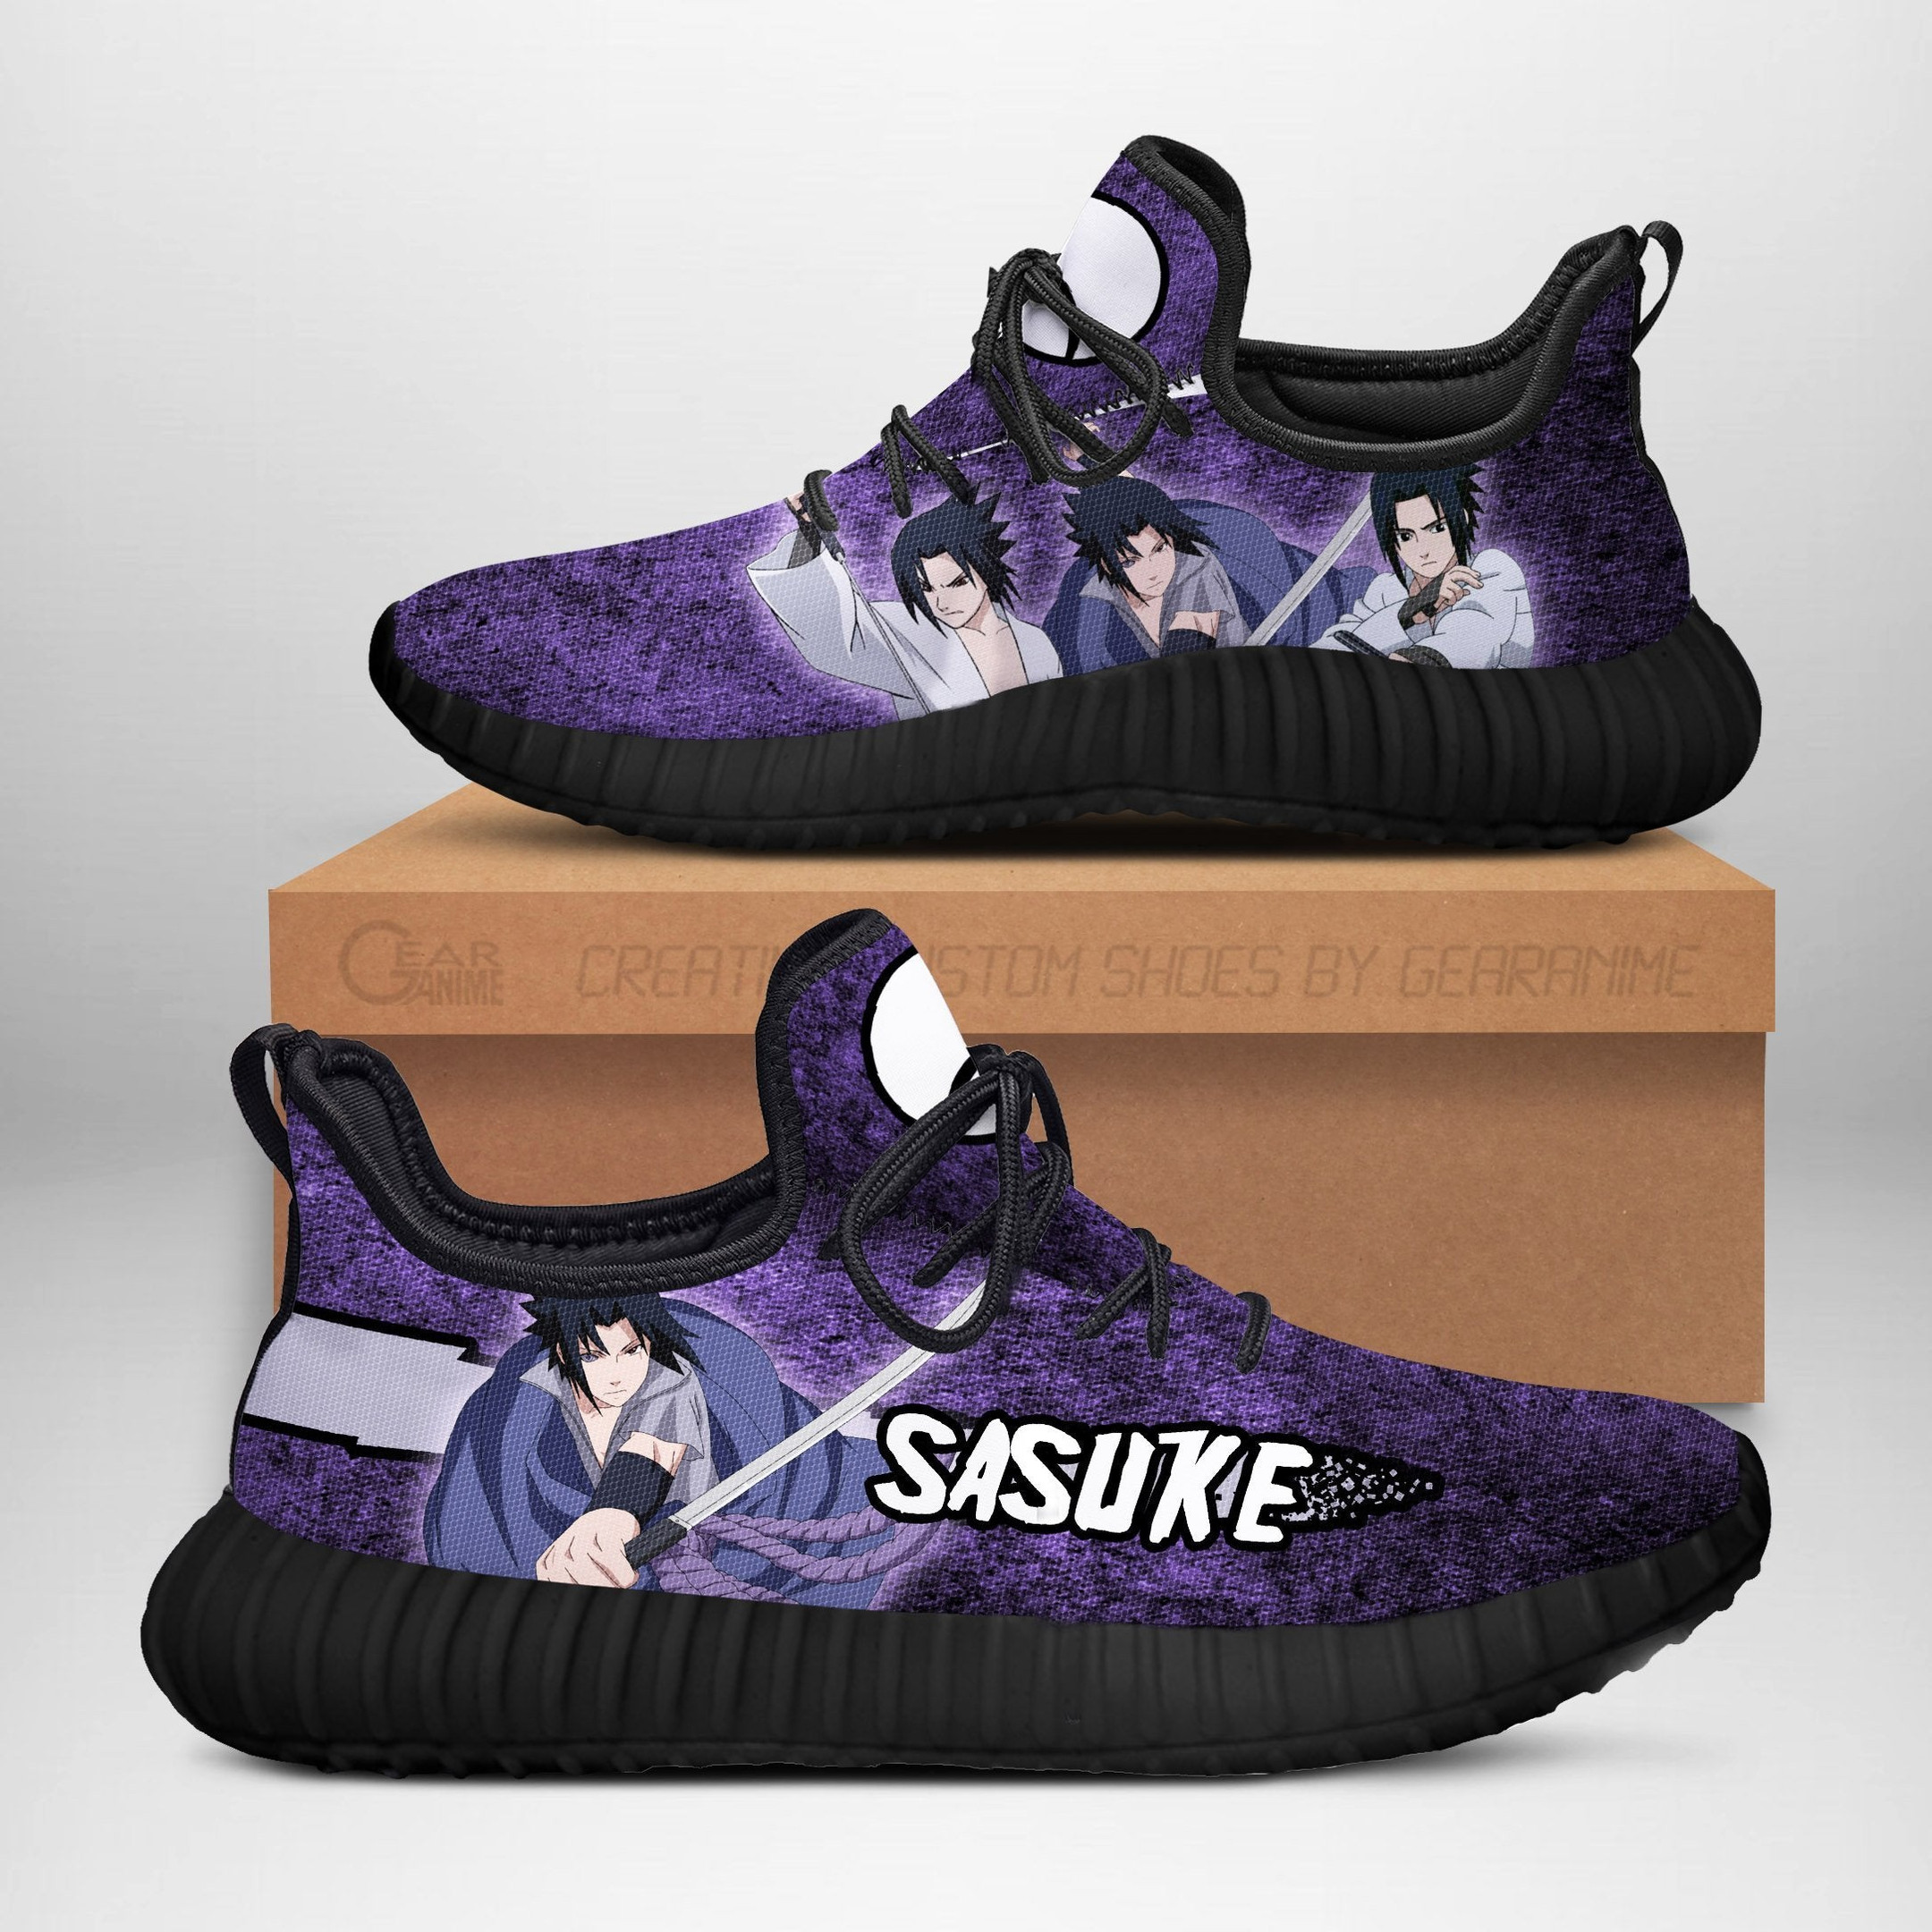 This Shoes are the perfect gift for any fan of the popular anime series 127